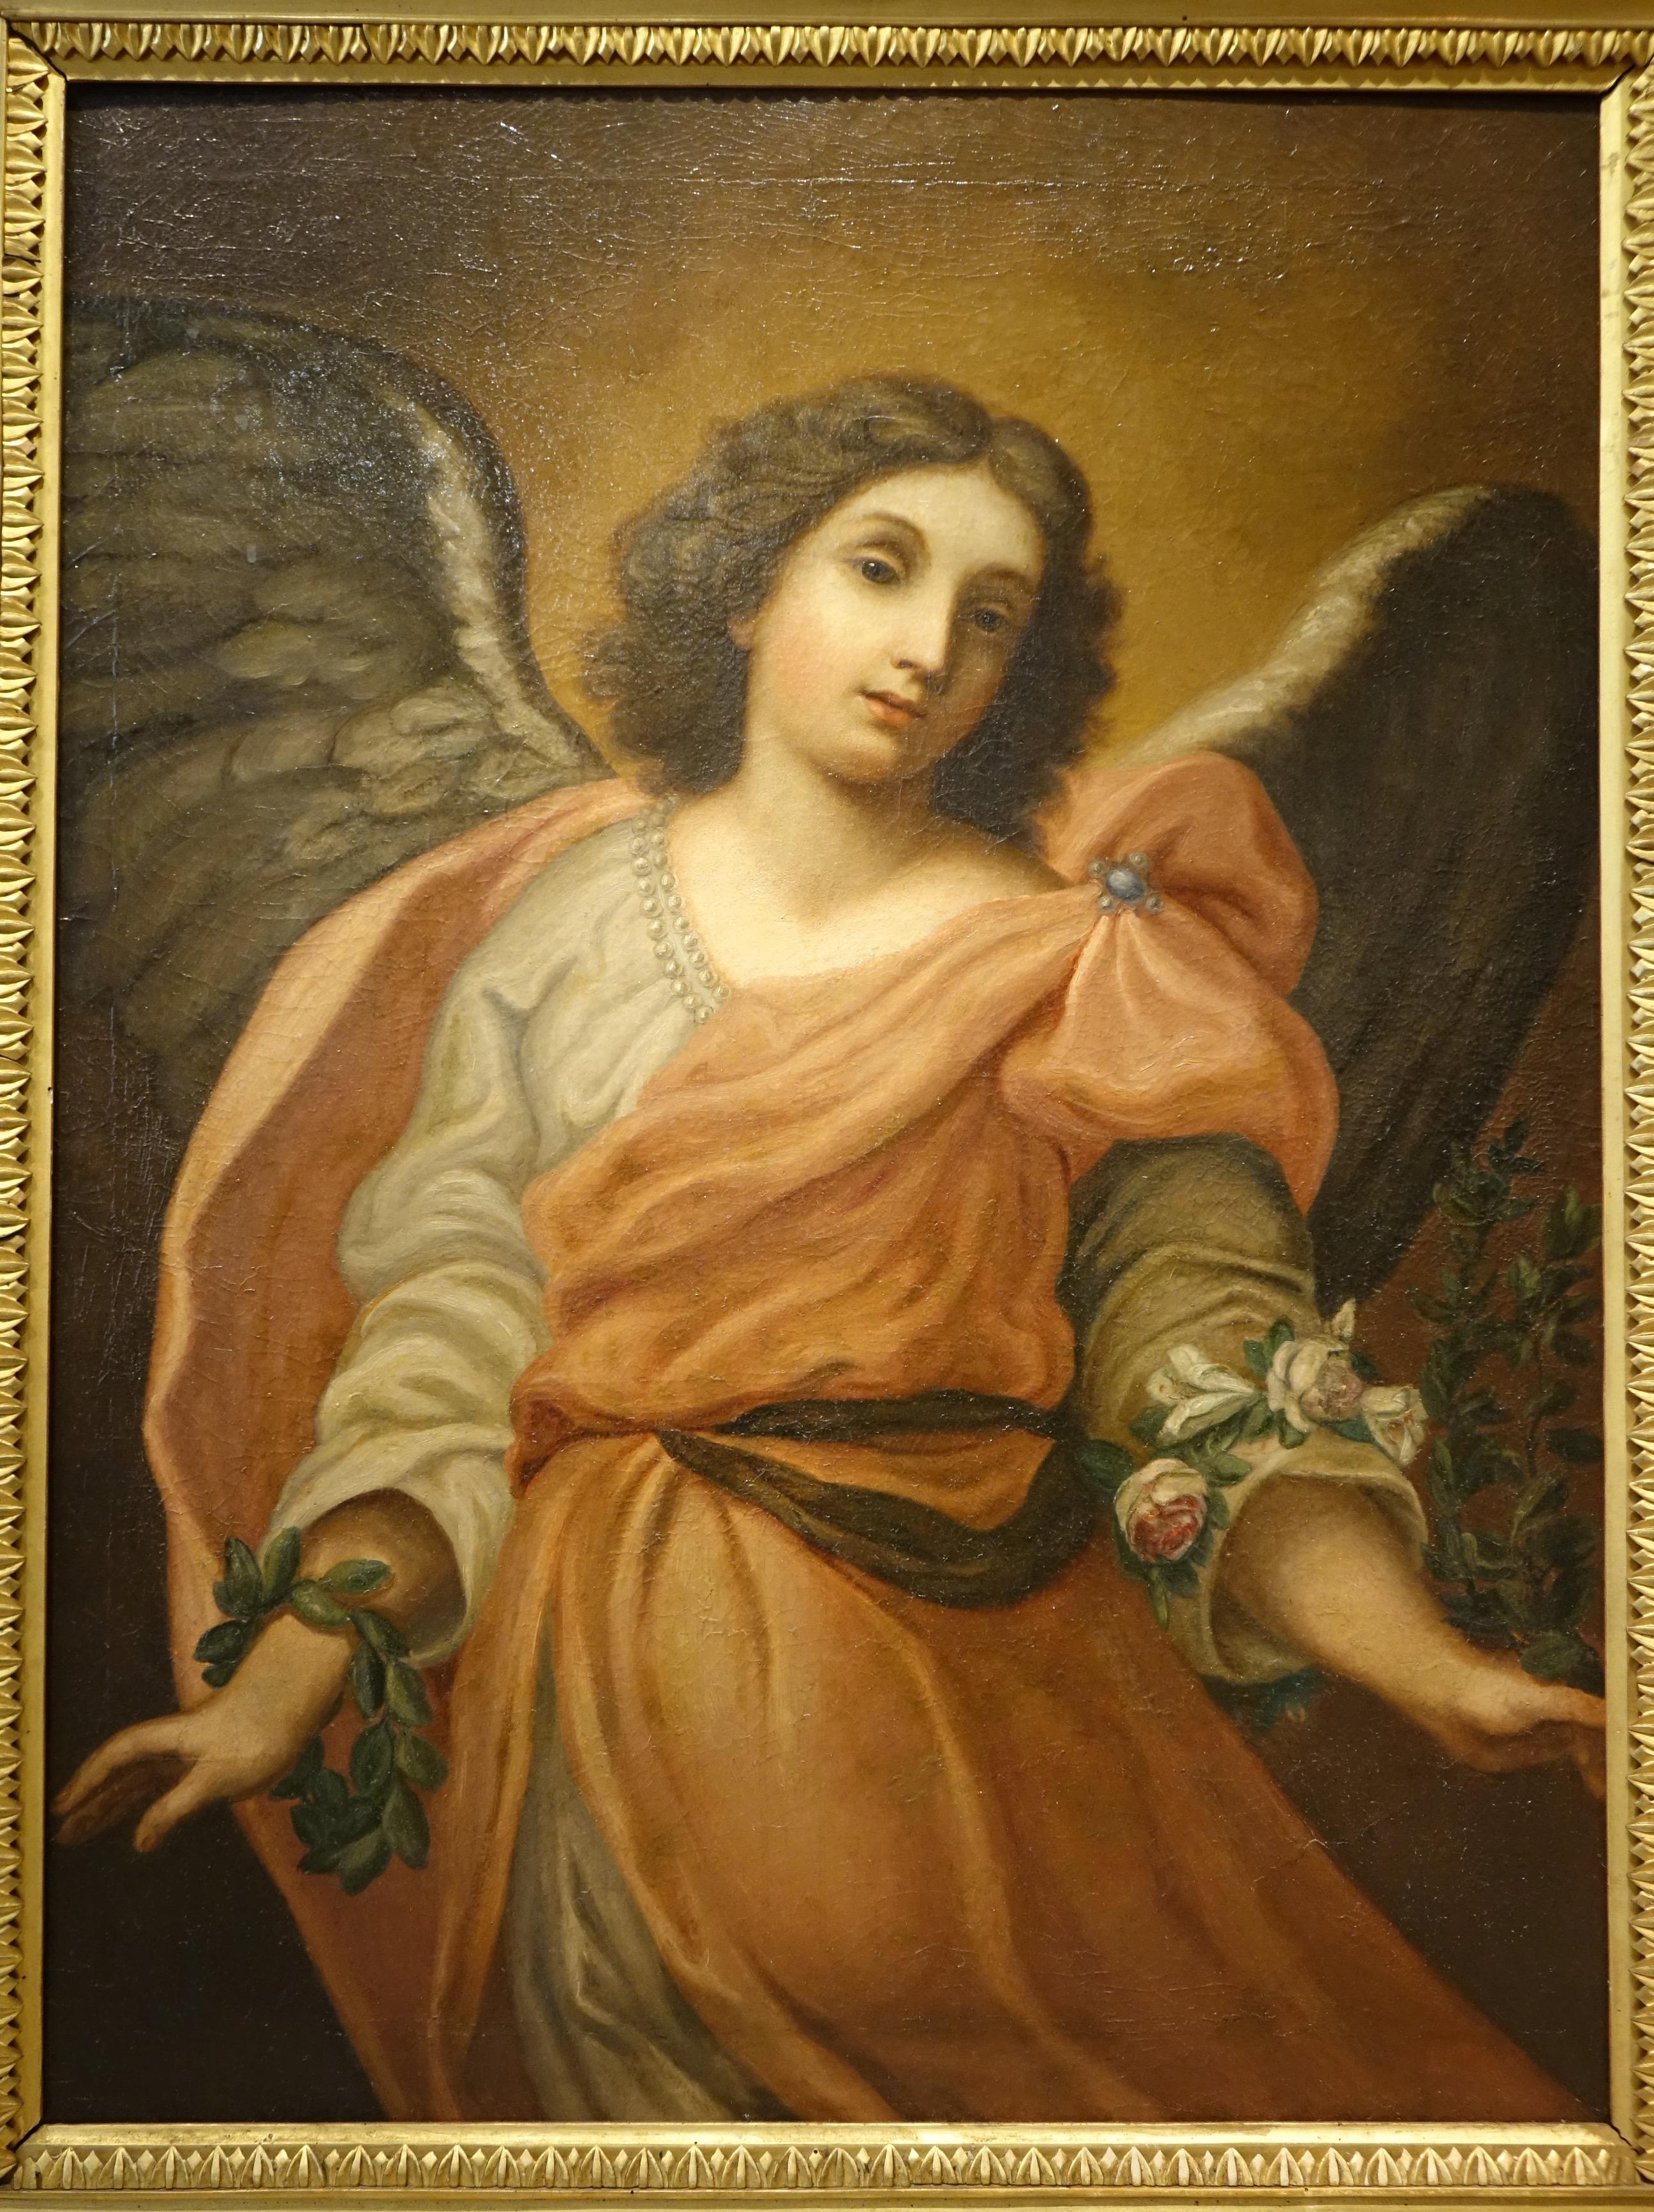 Oil on canvas depicting the Angel of the Annunciation.
Sent by God, the angel Gabriel announces to Mary that she will conceive a son of the Holy Spirit, whom she will name Jesus (Luke 1:26-38).
He wears a wreath of roses and an olive branch in his